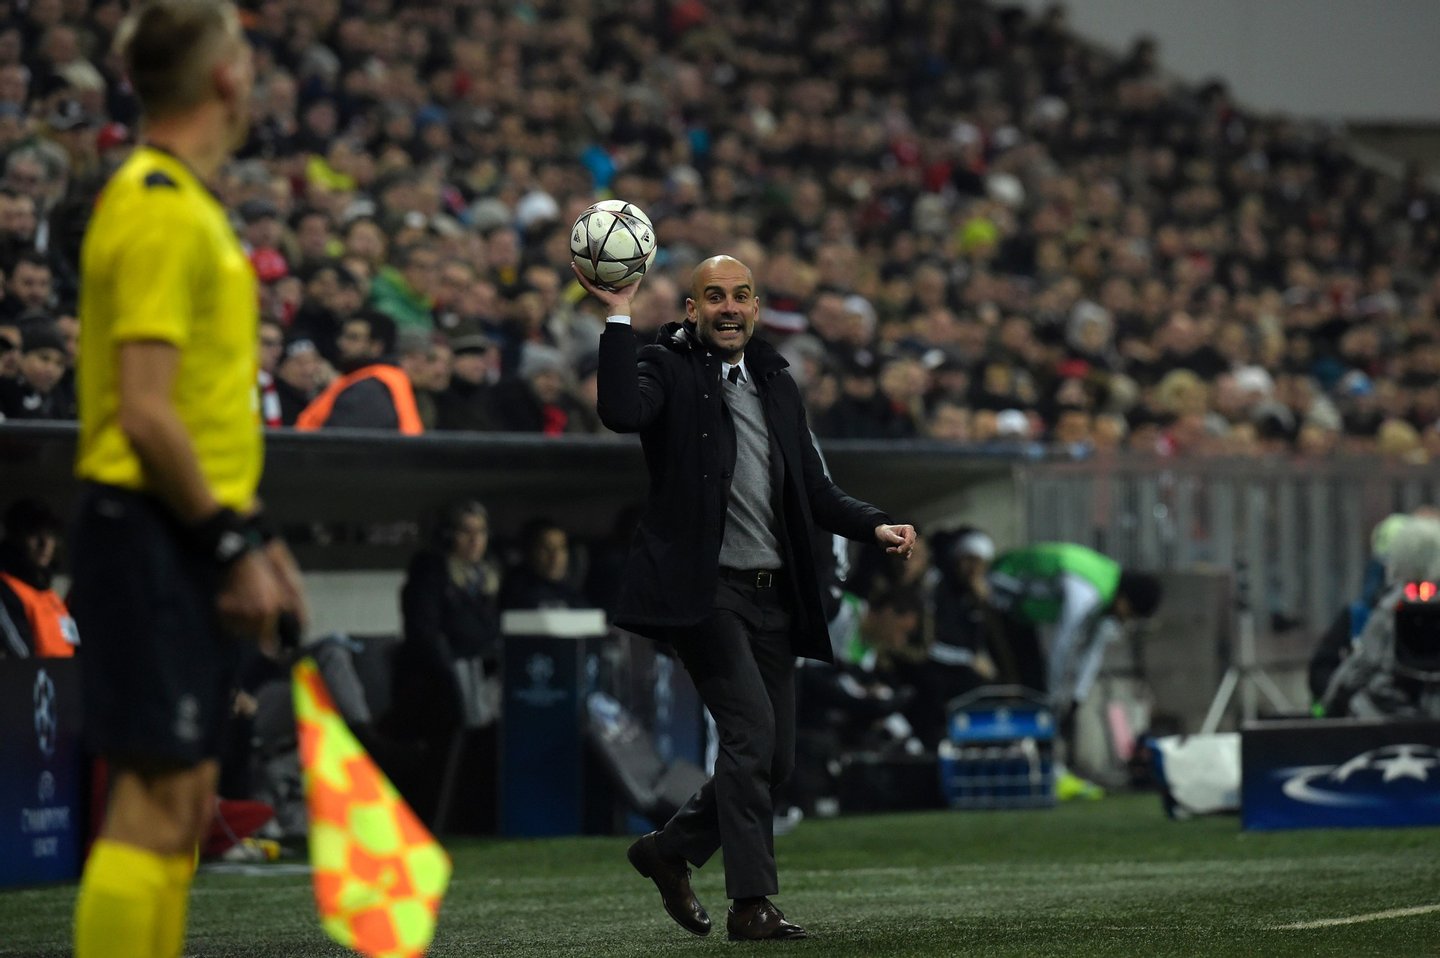 Bayern Munich's Spanish head coach Pep Guardiola throws the ball during the UEFA Champions League, Round of 16, second leg football match FC Bayern Munich v Juventus in Munich, southern Germany on March 16, 2016. / AFP / TOBIAS SCHWARZ (Photo credit should read TOBIAS SCHWARZ/AFP/Getty Images)